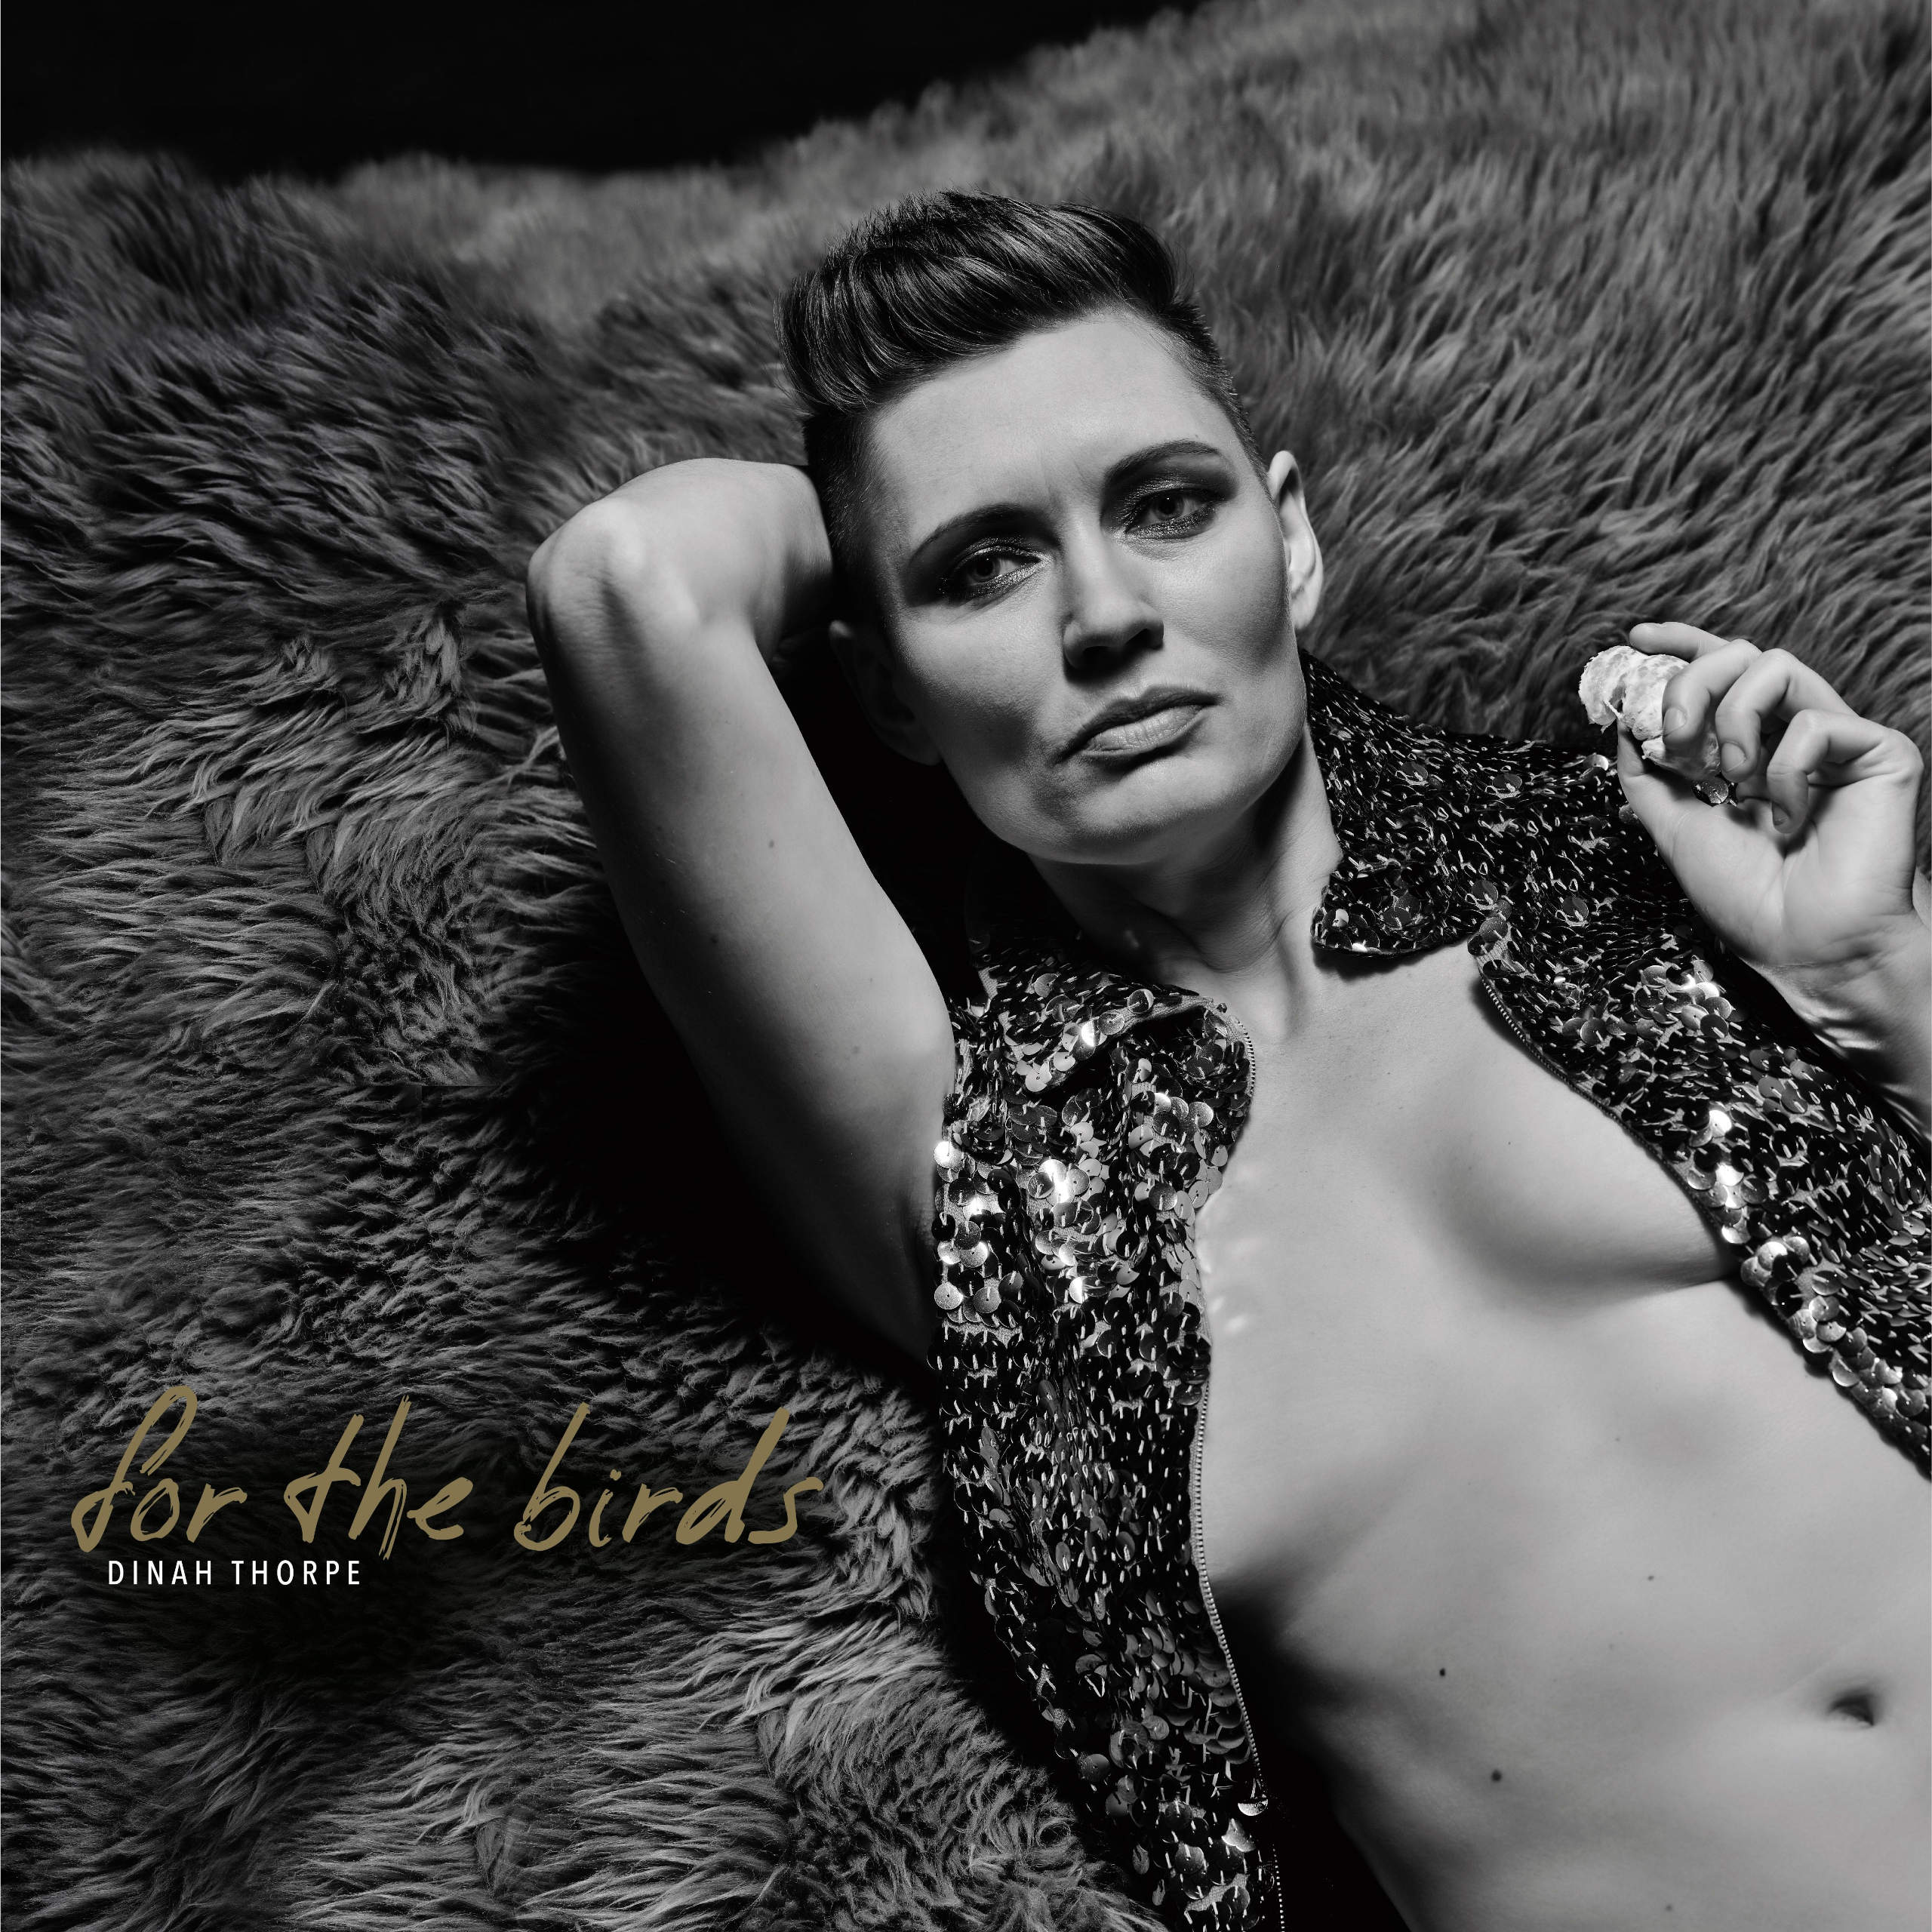 UnCovered: Dinah Thorpe on the Provocative Cover Artwork for Her Latest Album, ‘For The Birds’